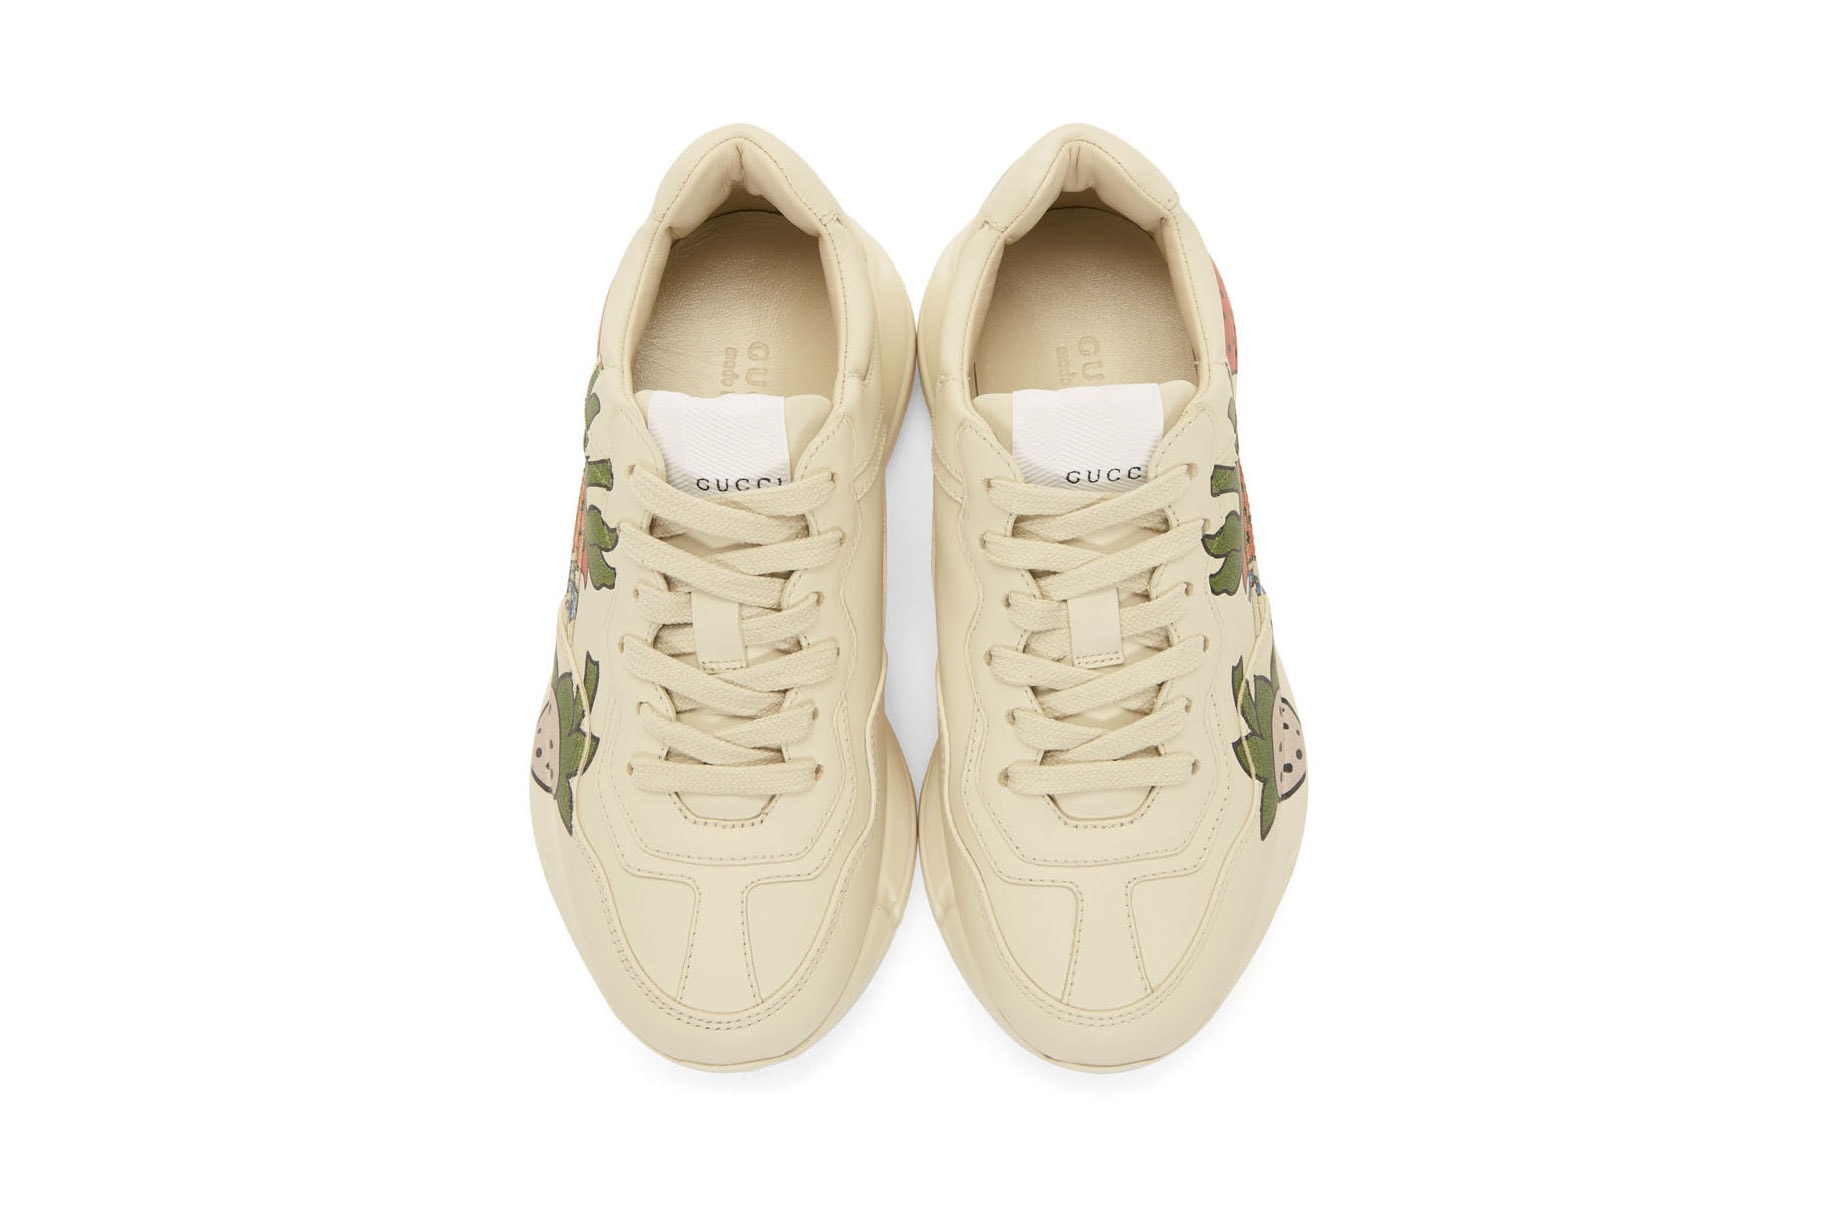 gucci sneakers strawberry alessandro michele footwear shoes ssense